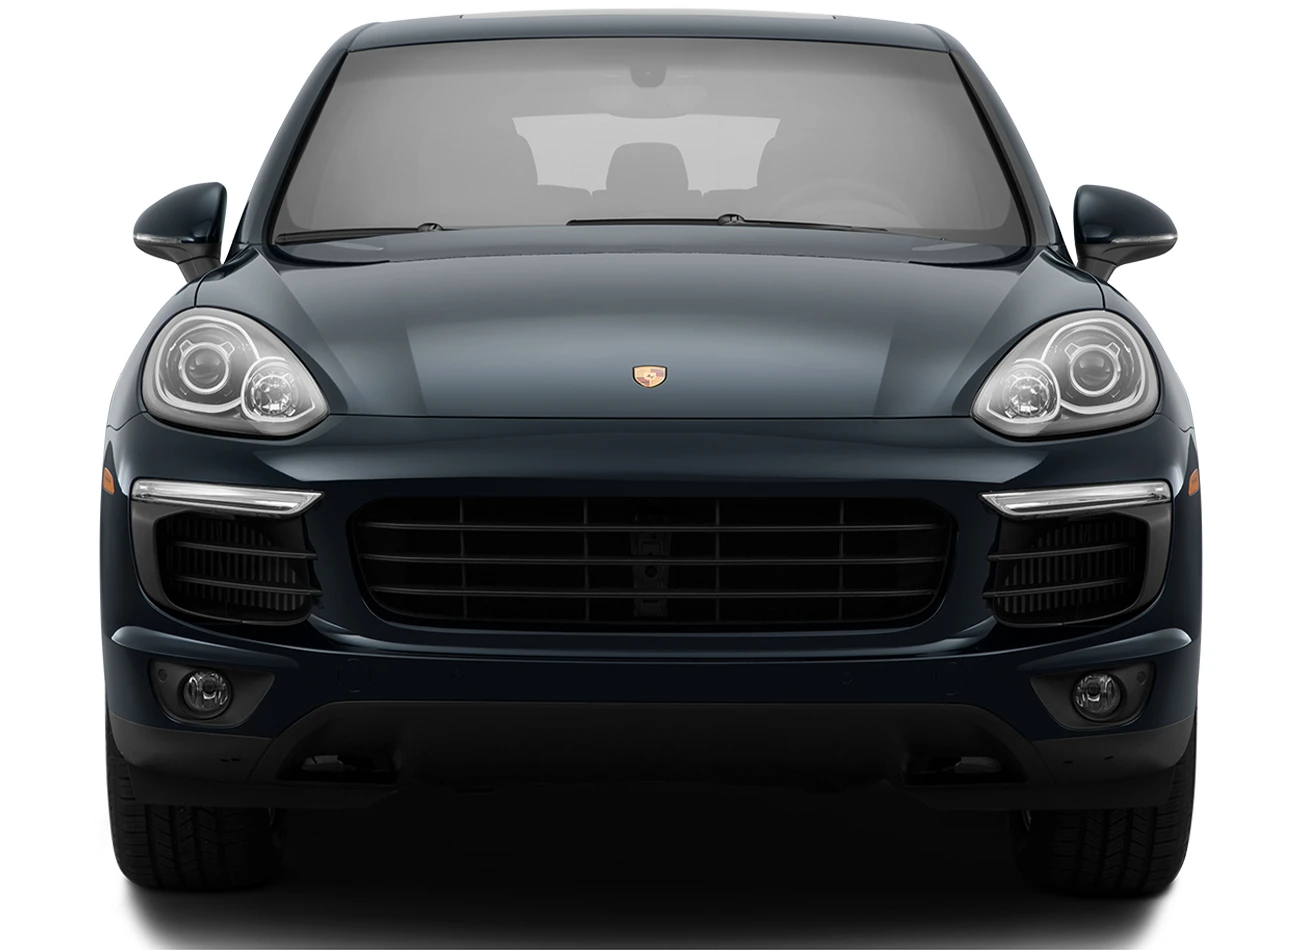 2015 Porsche Cayenne: Reviews, Photos, and More: Reasons to Buy #4 | CarMax